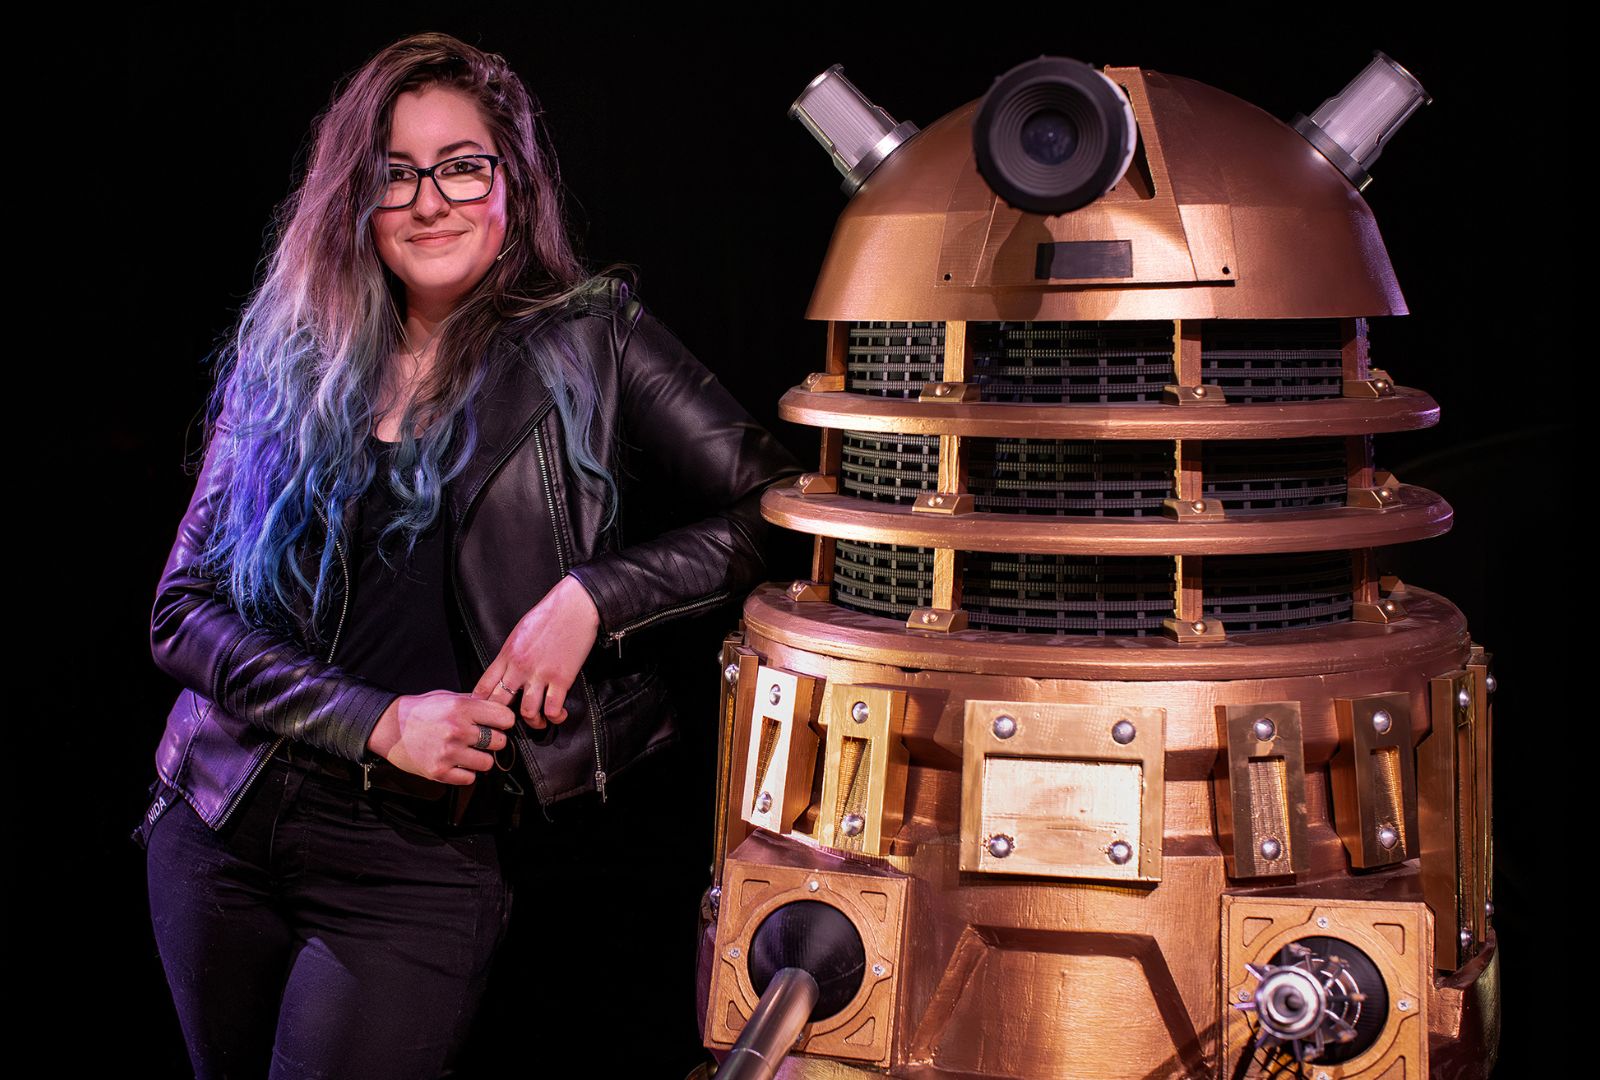 Eryn Douglas with her third-year major work, a Dalek from the tv series 'Doctor Who'.